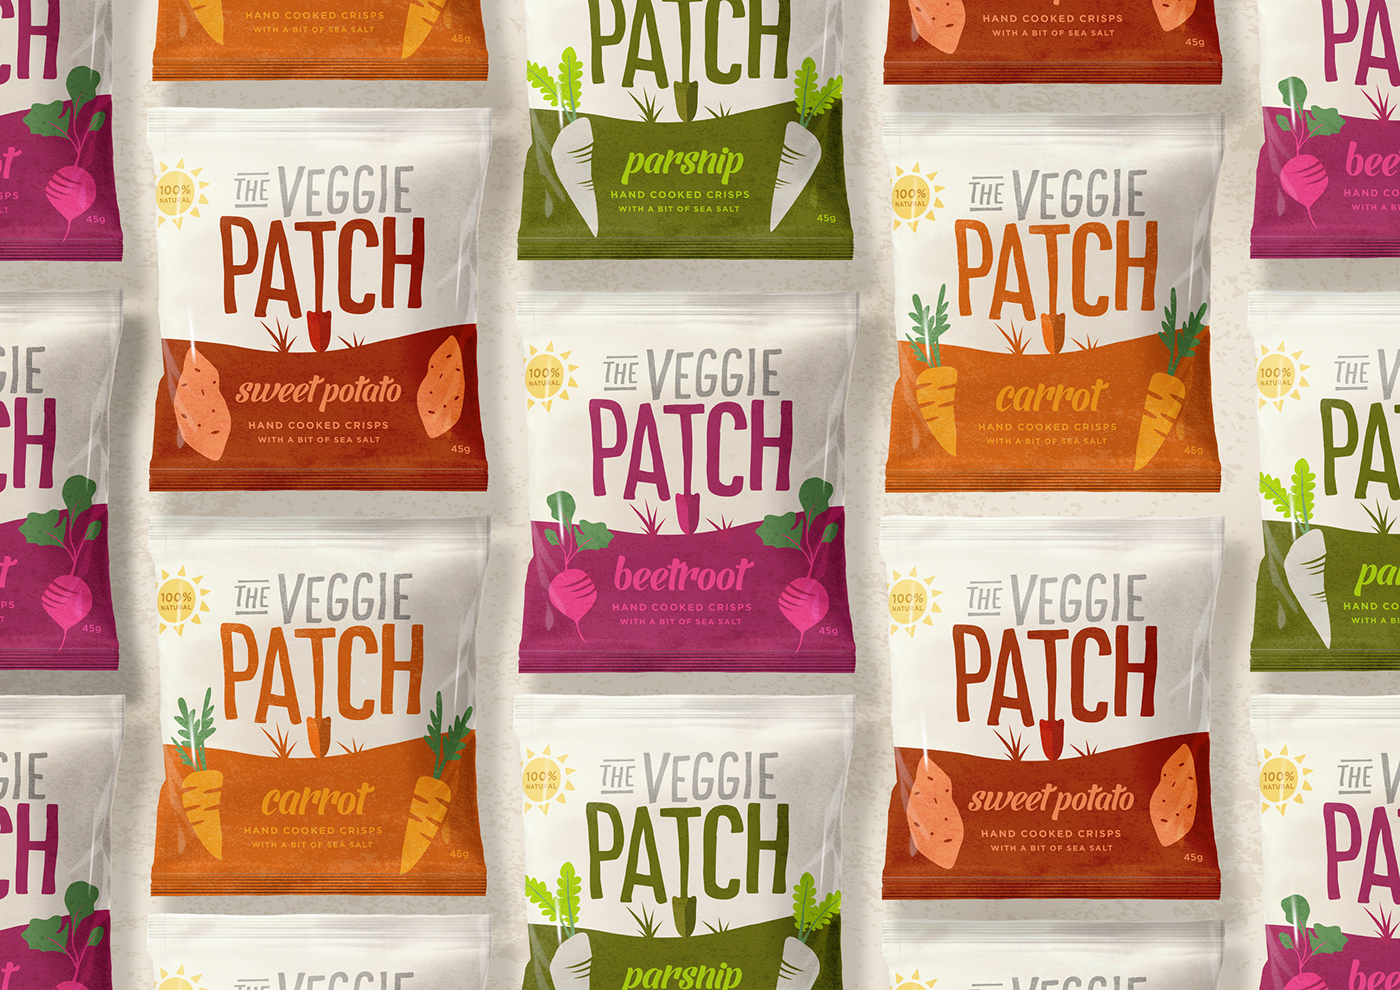 snack packaging crisps packaging CHIPS PACKAGING  packaging design brand identity brand narrative consumer branding health food packaging Our Revolution The Veggie Patch